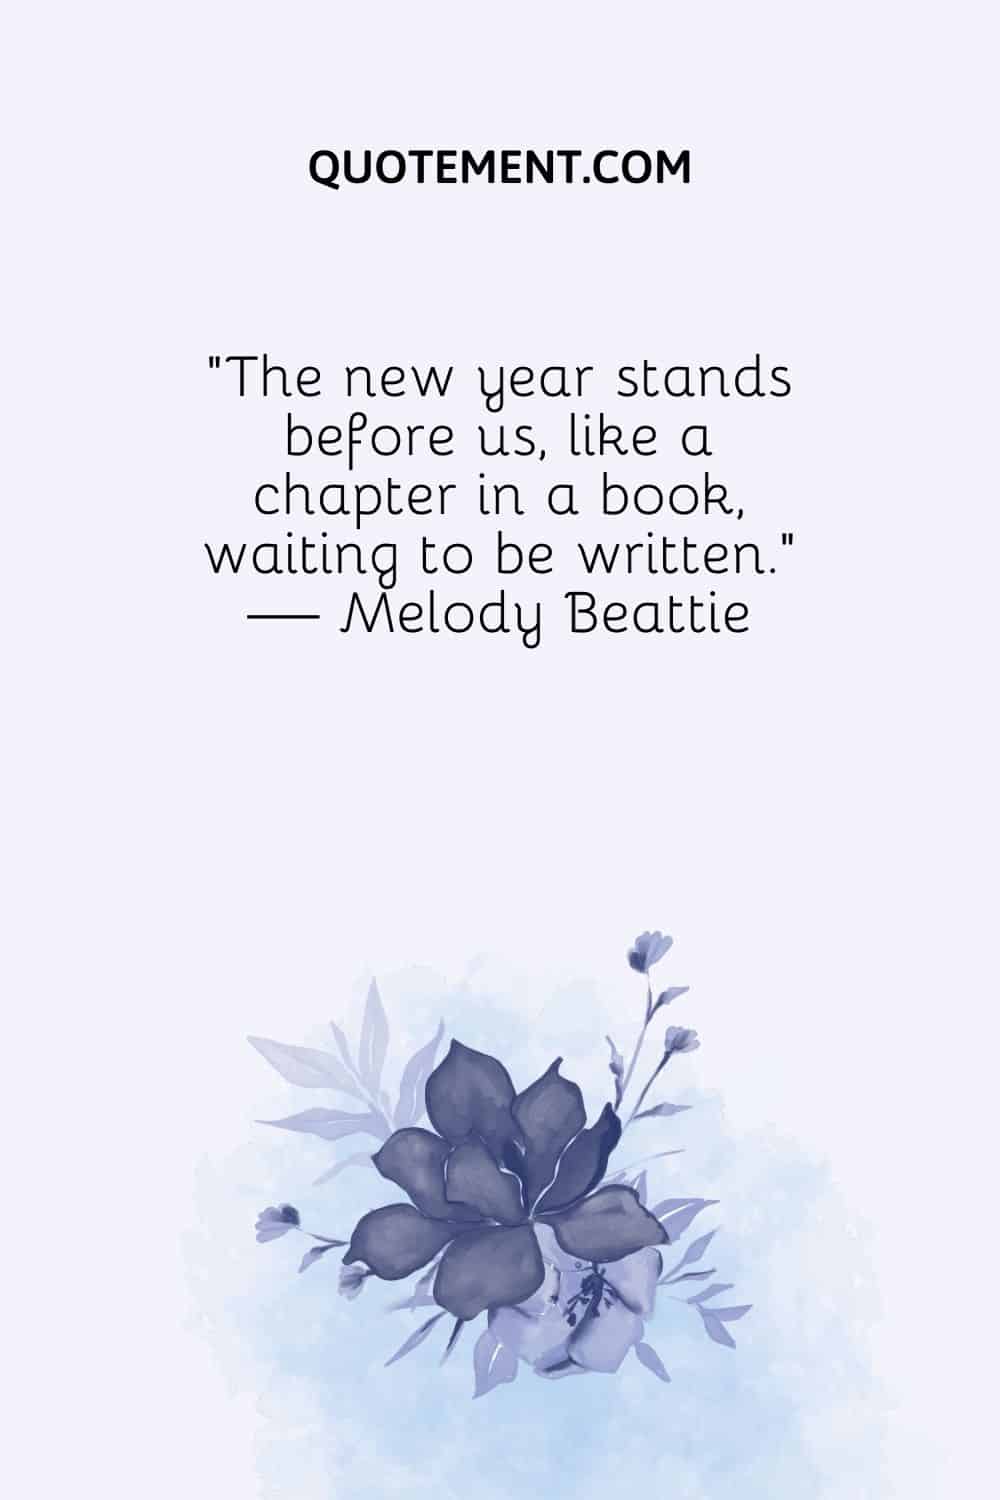 The new year stands before us, like a chapter in a book, waiting to be written